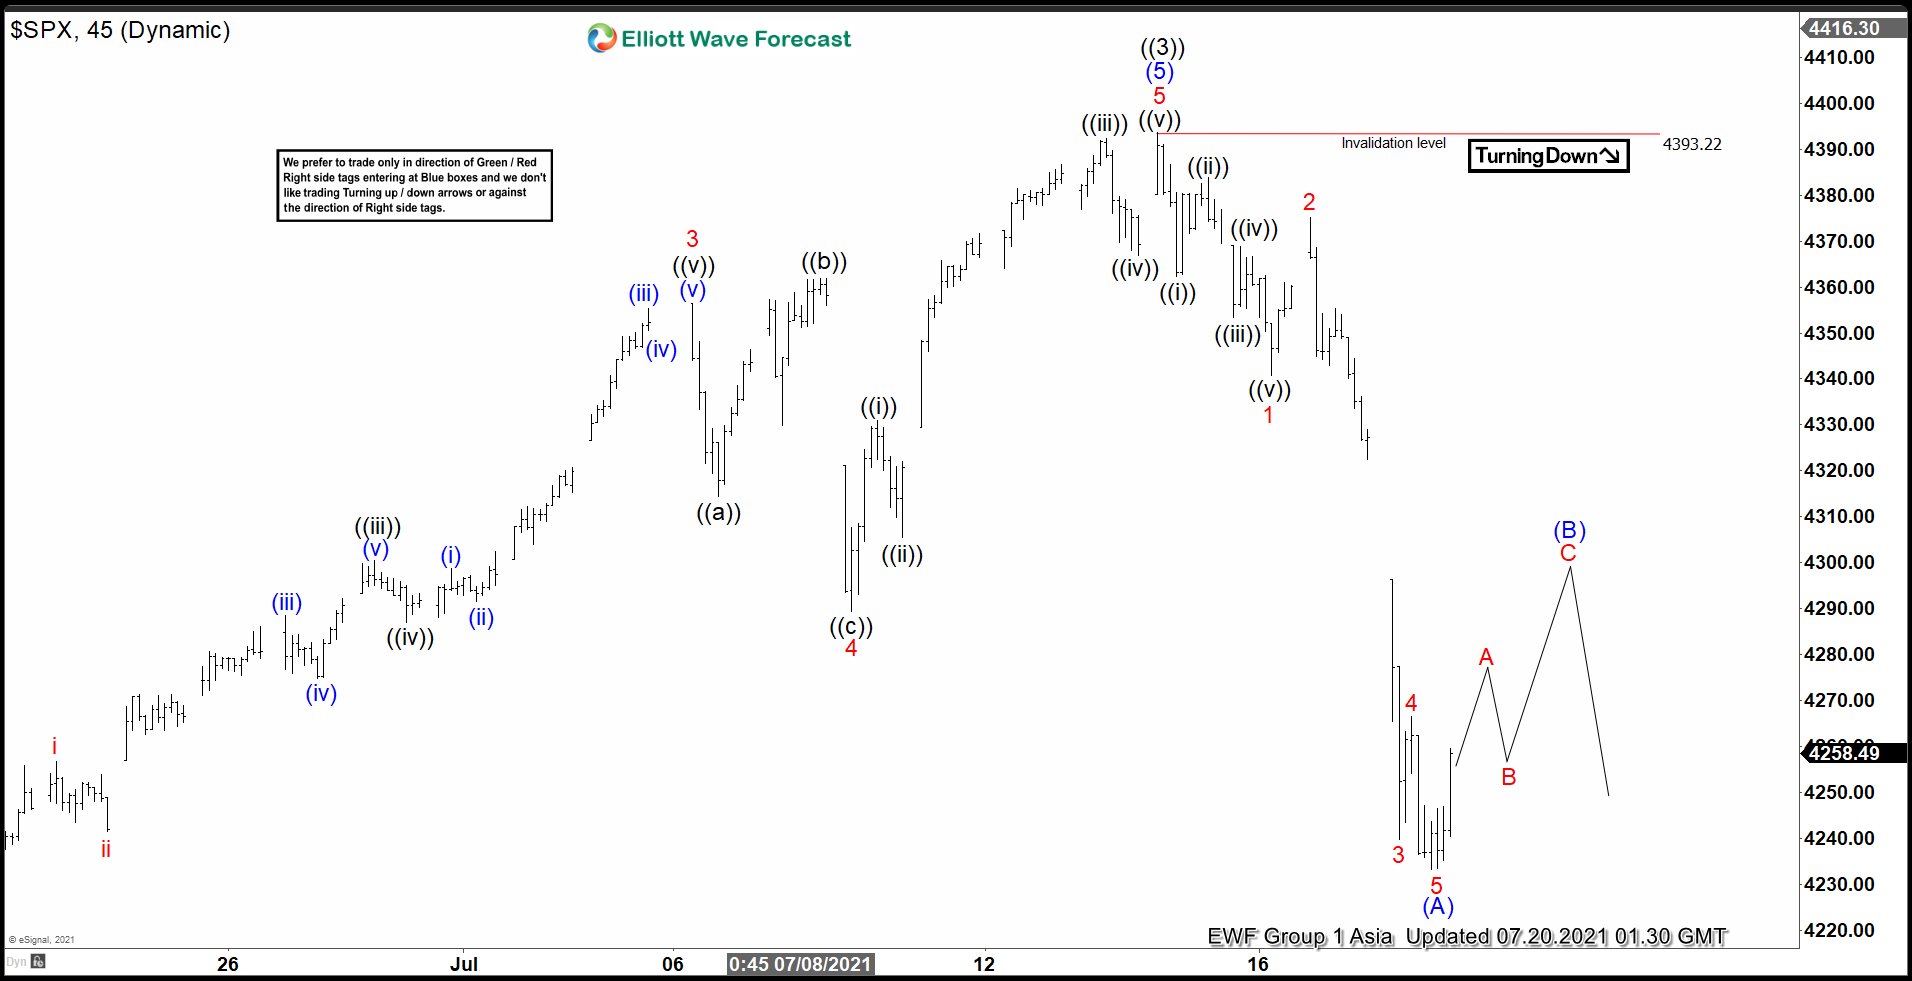 Elliott Wave View: SPX Correcting Larger Degree Cycle